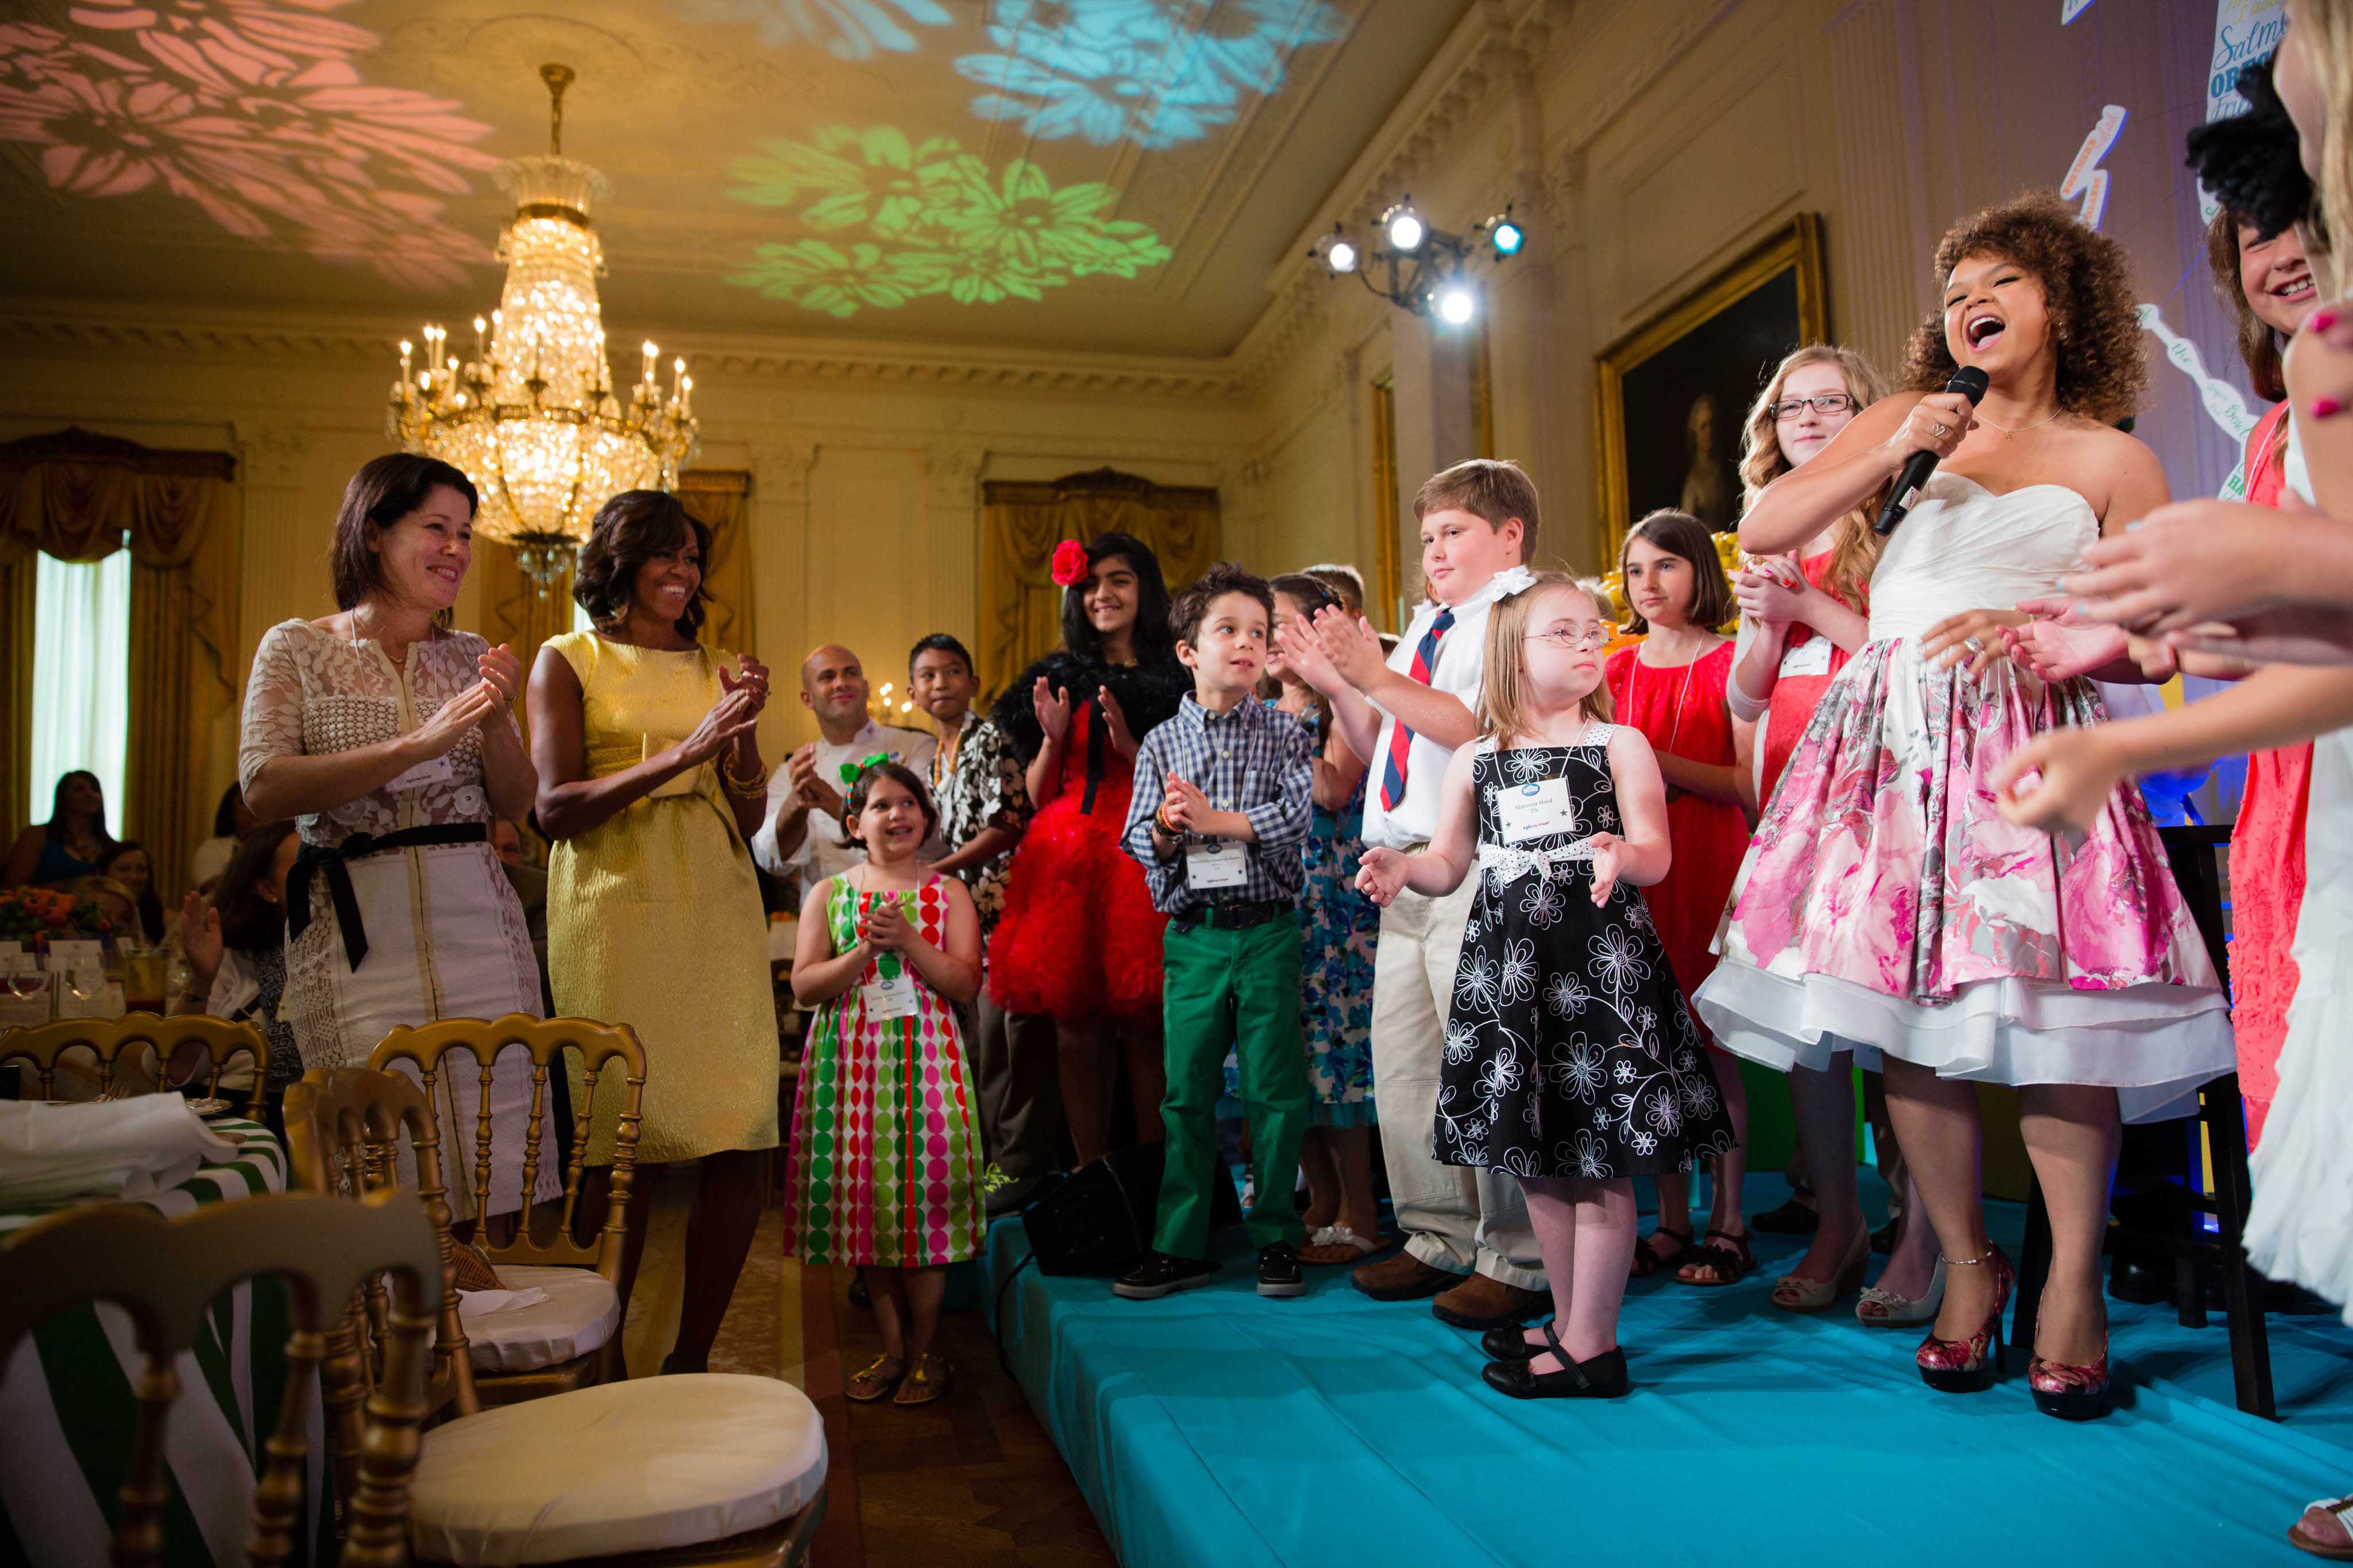 Michelle Obama dances as Rachel Crow performs during the Kids' State Dinner, 2013